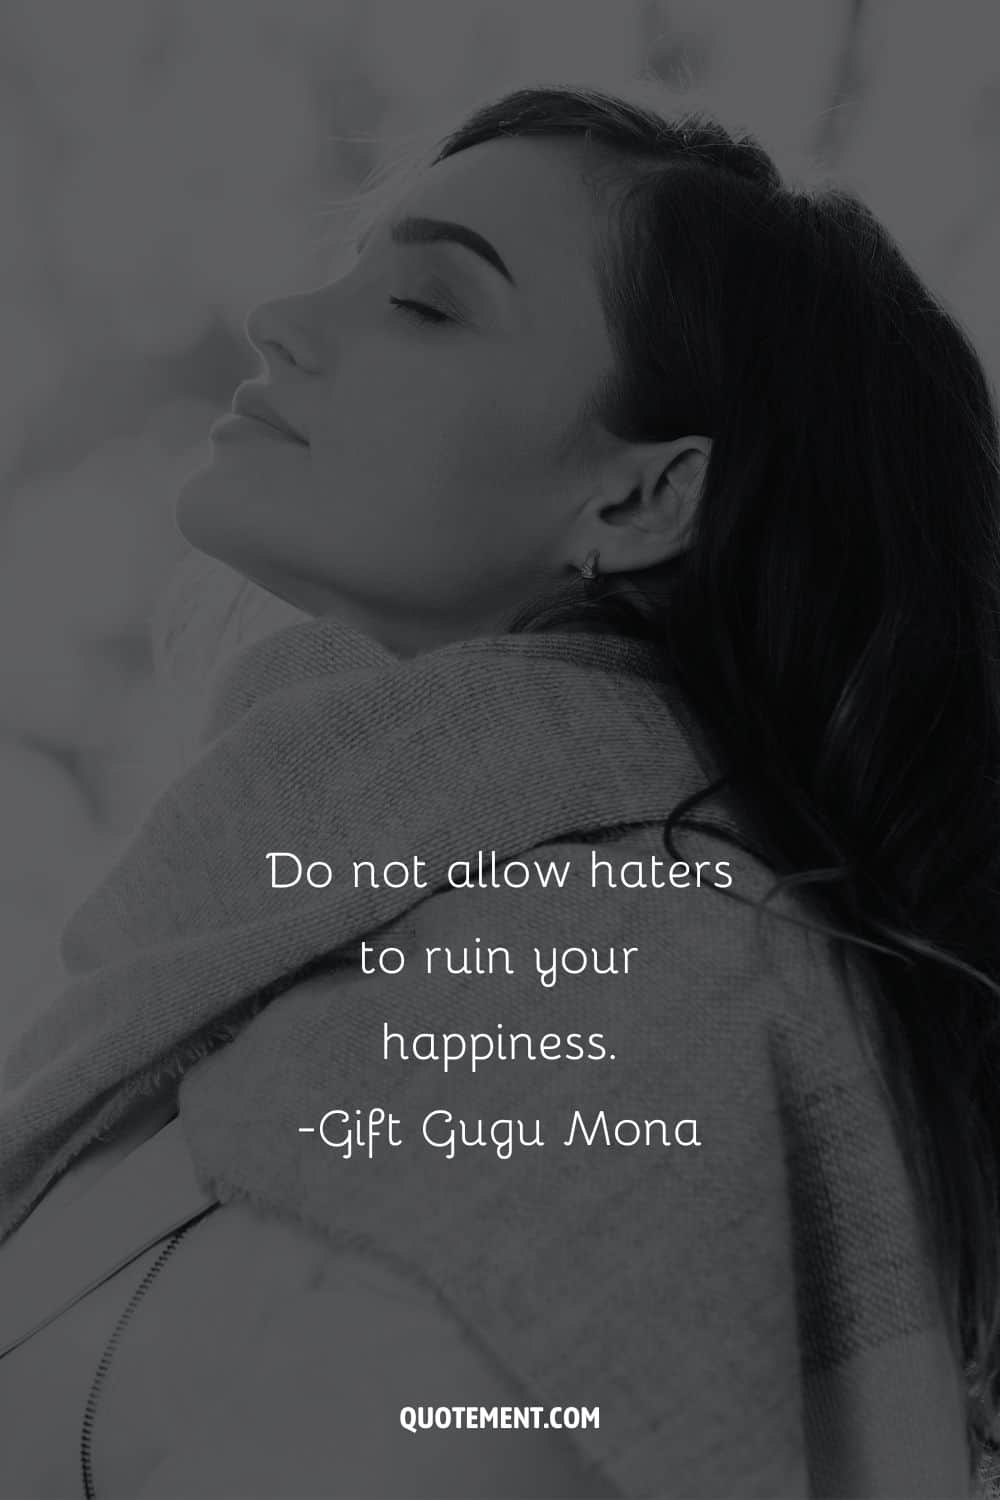 Do not allow haters to ruin your happiness